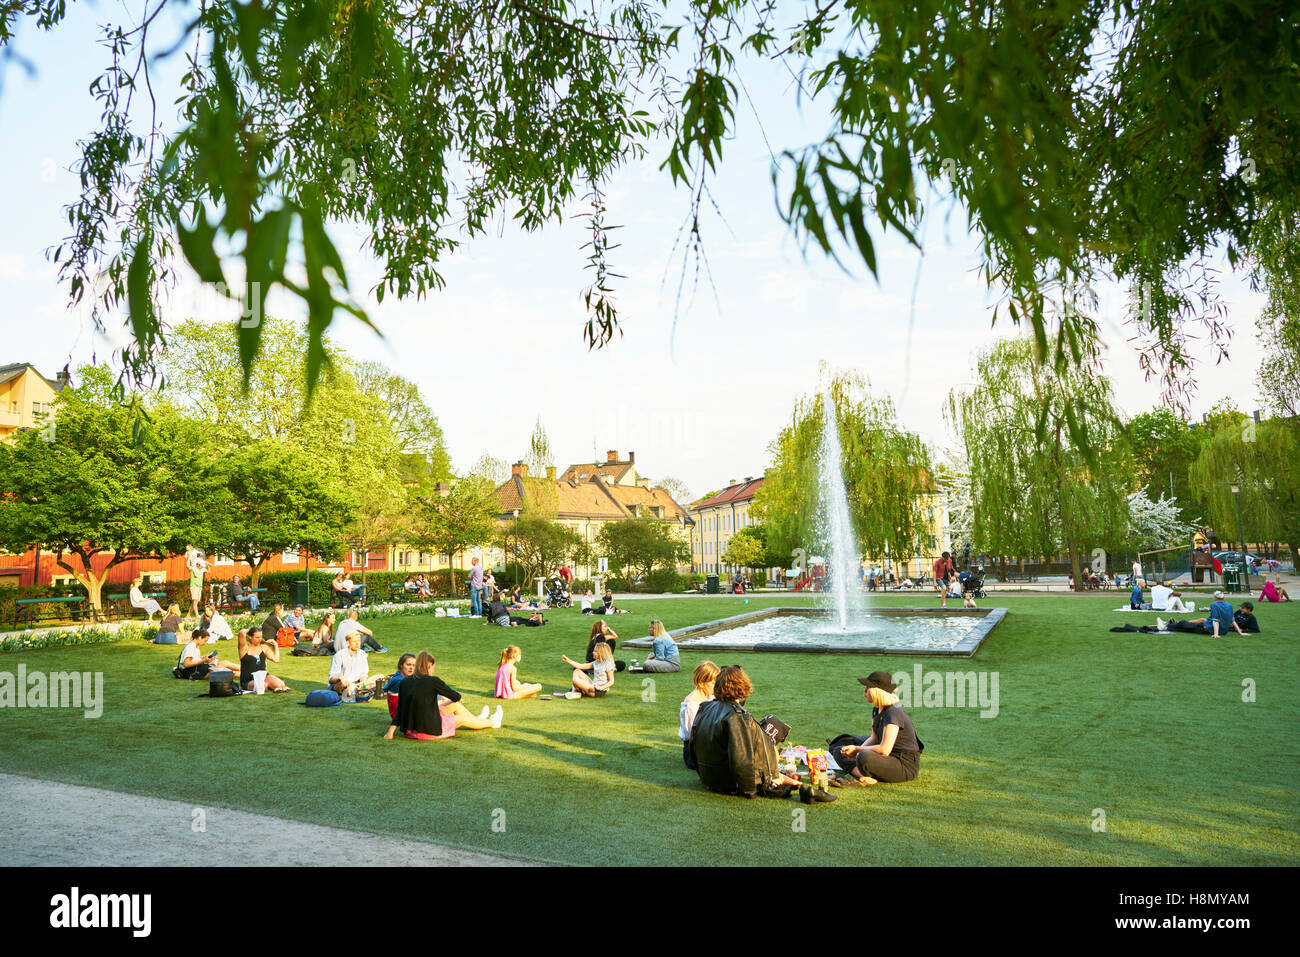 People resting on grass in park Stock Photo